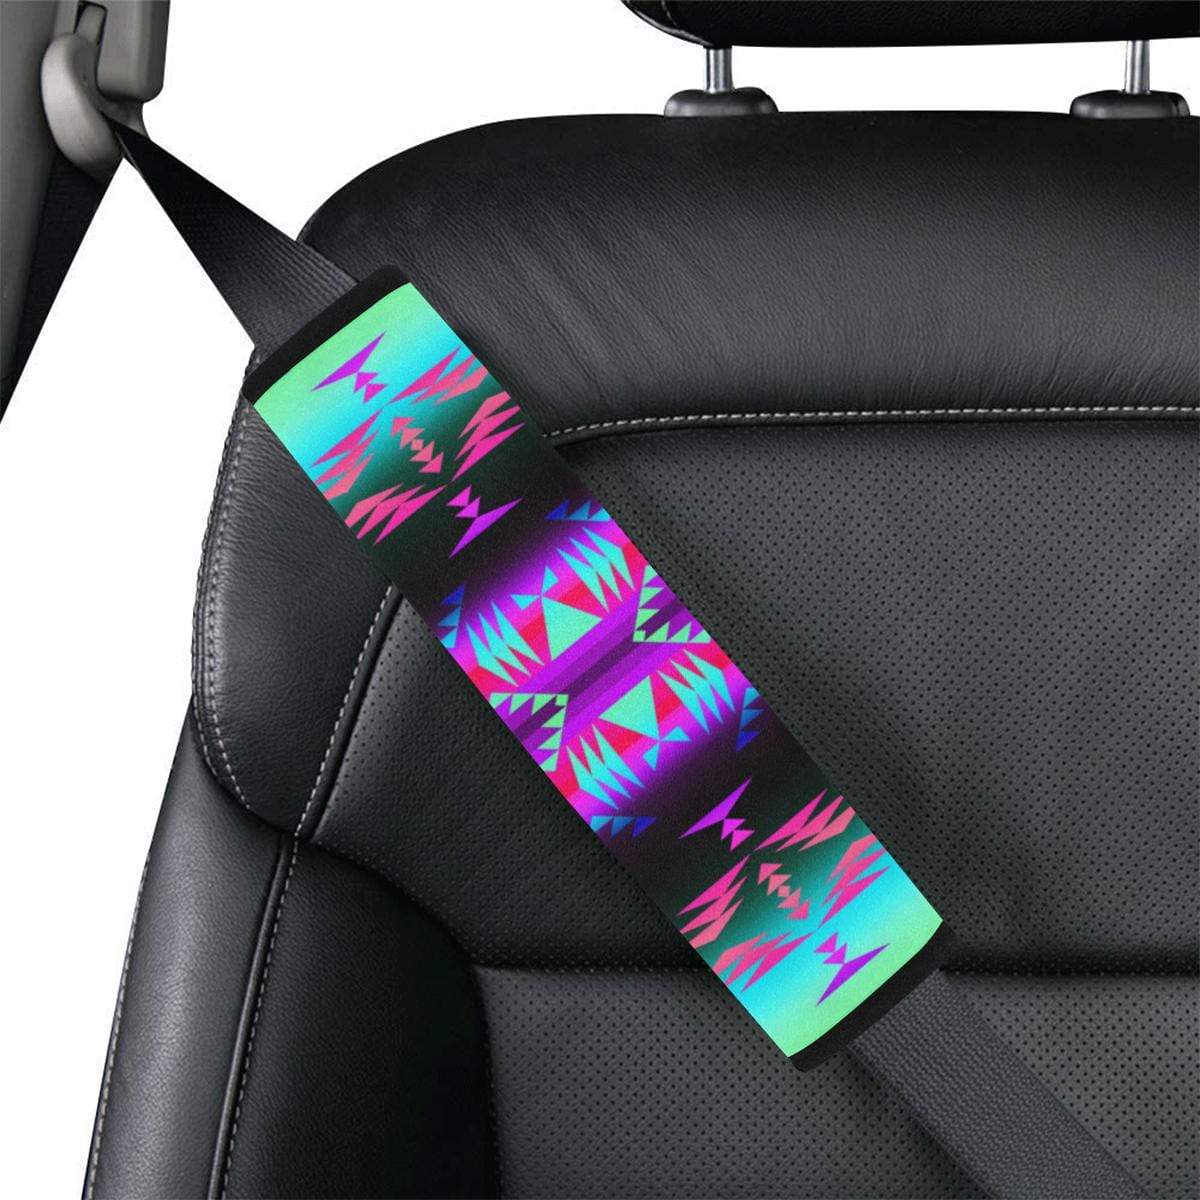 Between the Rocky Mountains Car Seat Belt Cover 7''x12.6'' Car Seat Belt Cover 7''x12.6'' e-joyer 